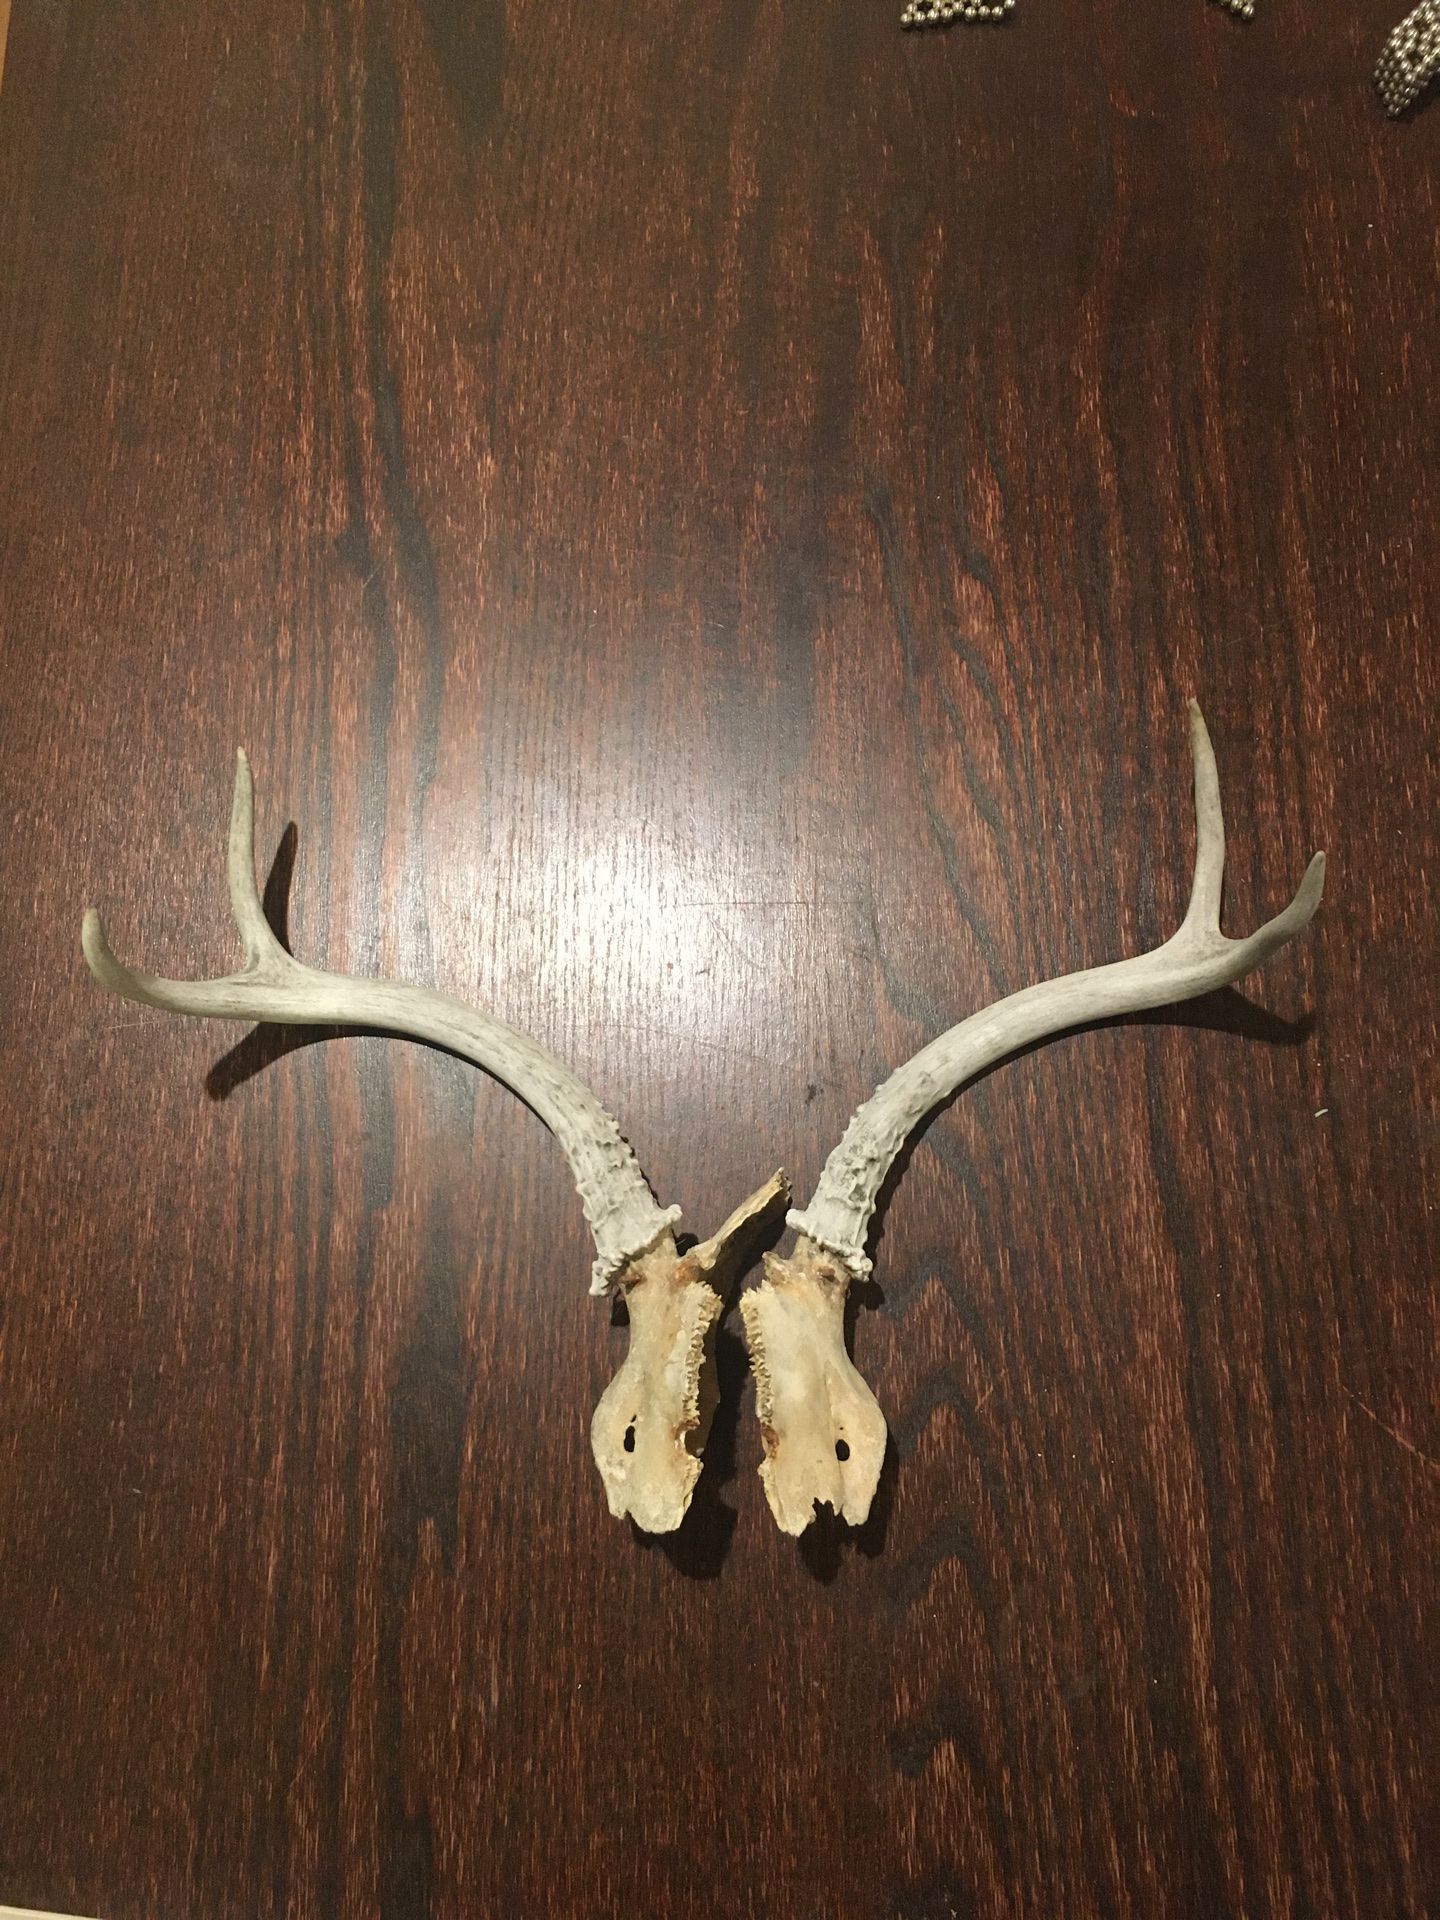 Pair of naturally shed deer antlers from the Socal high desert